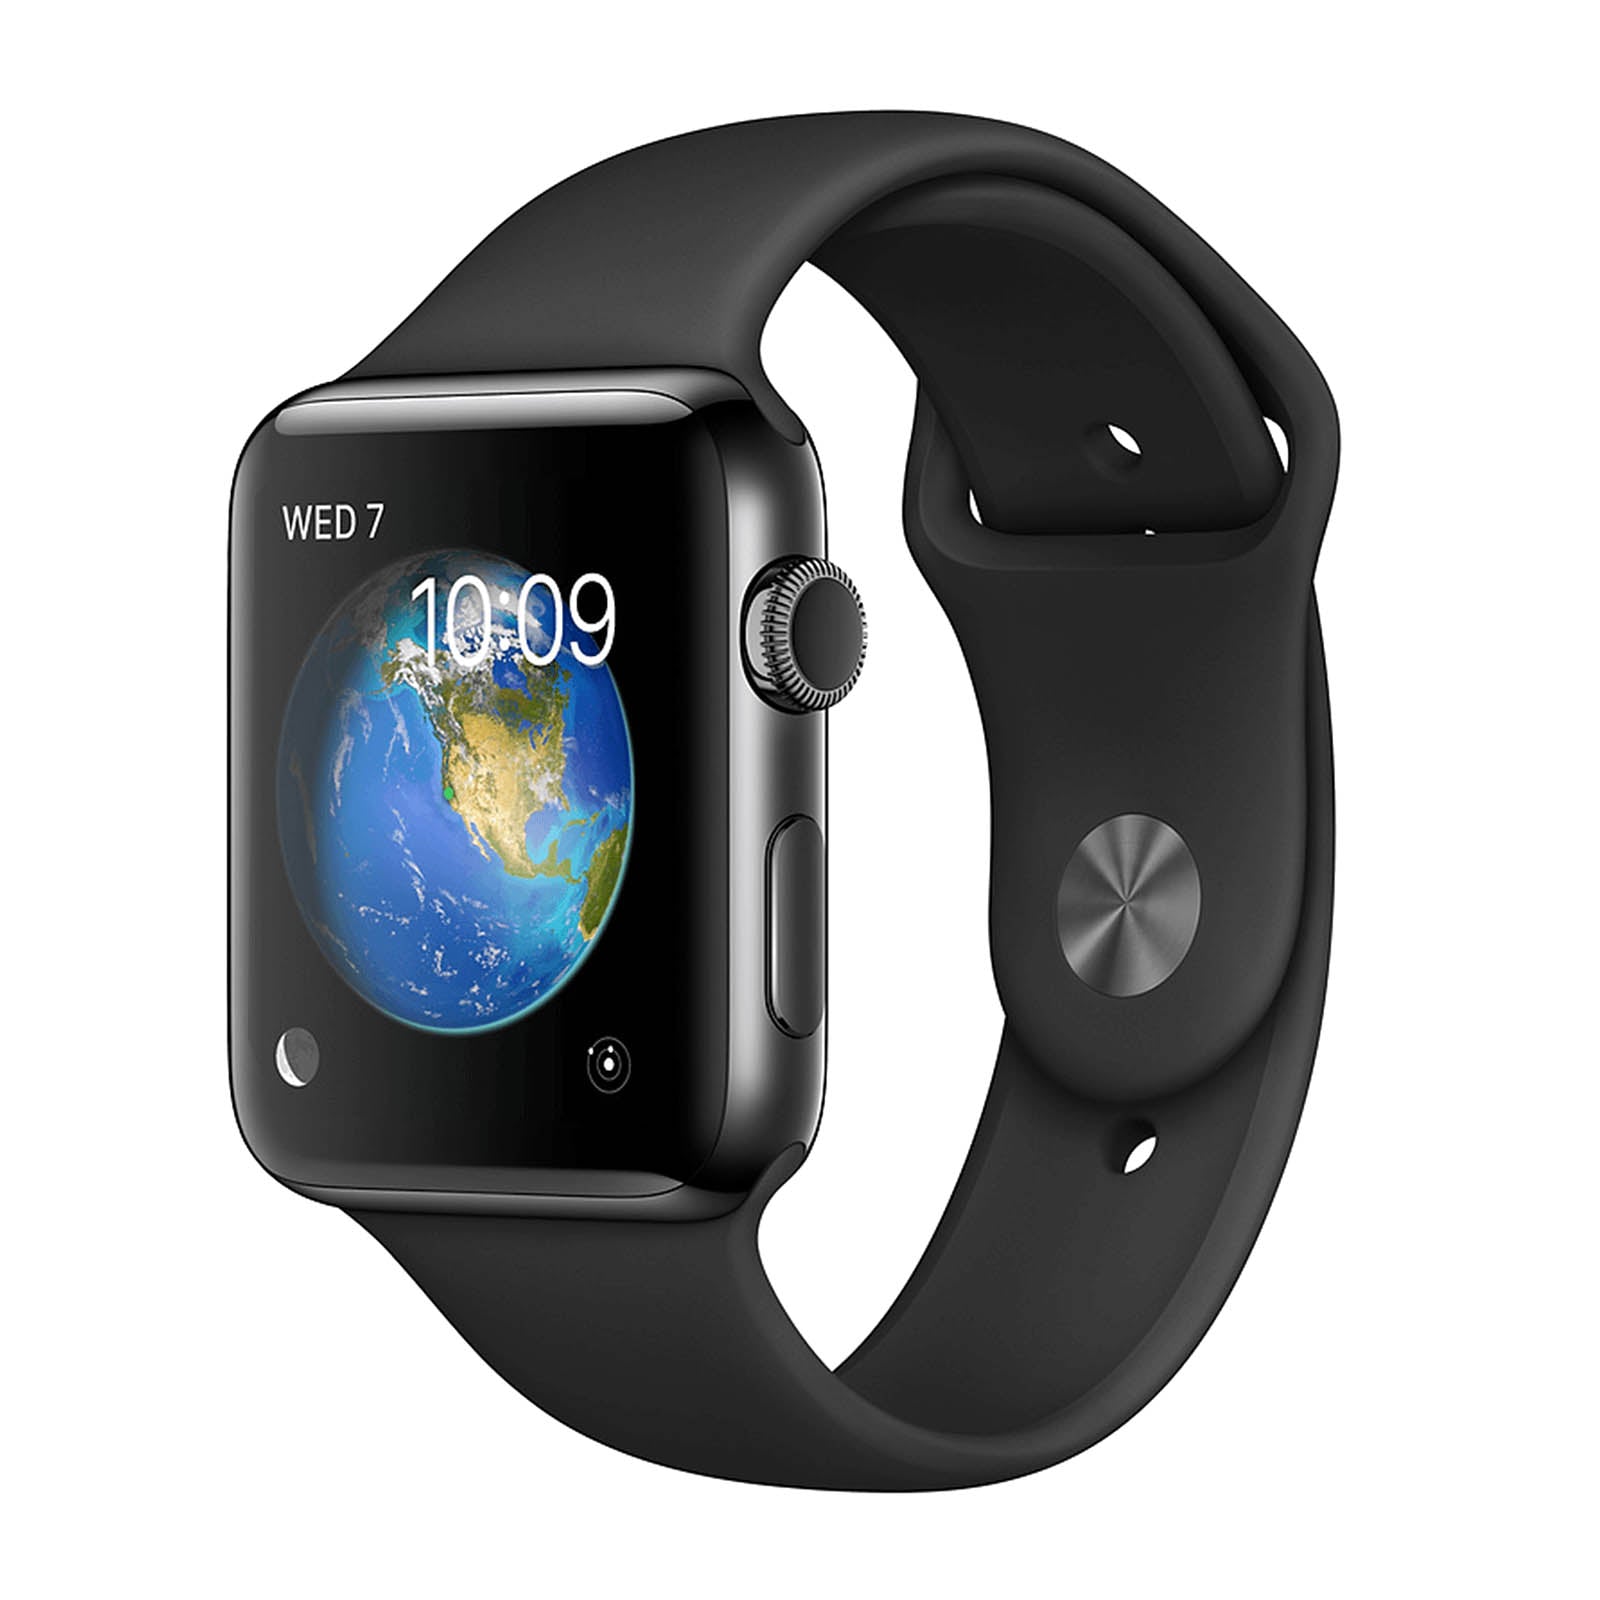 Apple Watch Series 2 Stainless 38mm GPS WiFi Silber